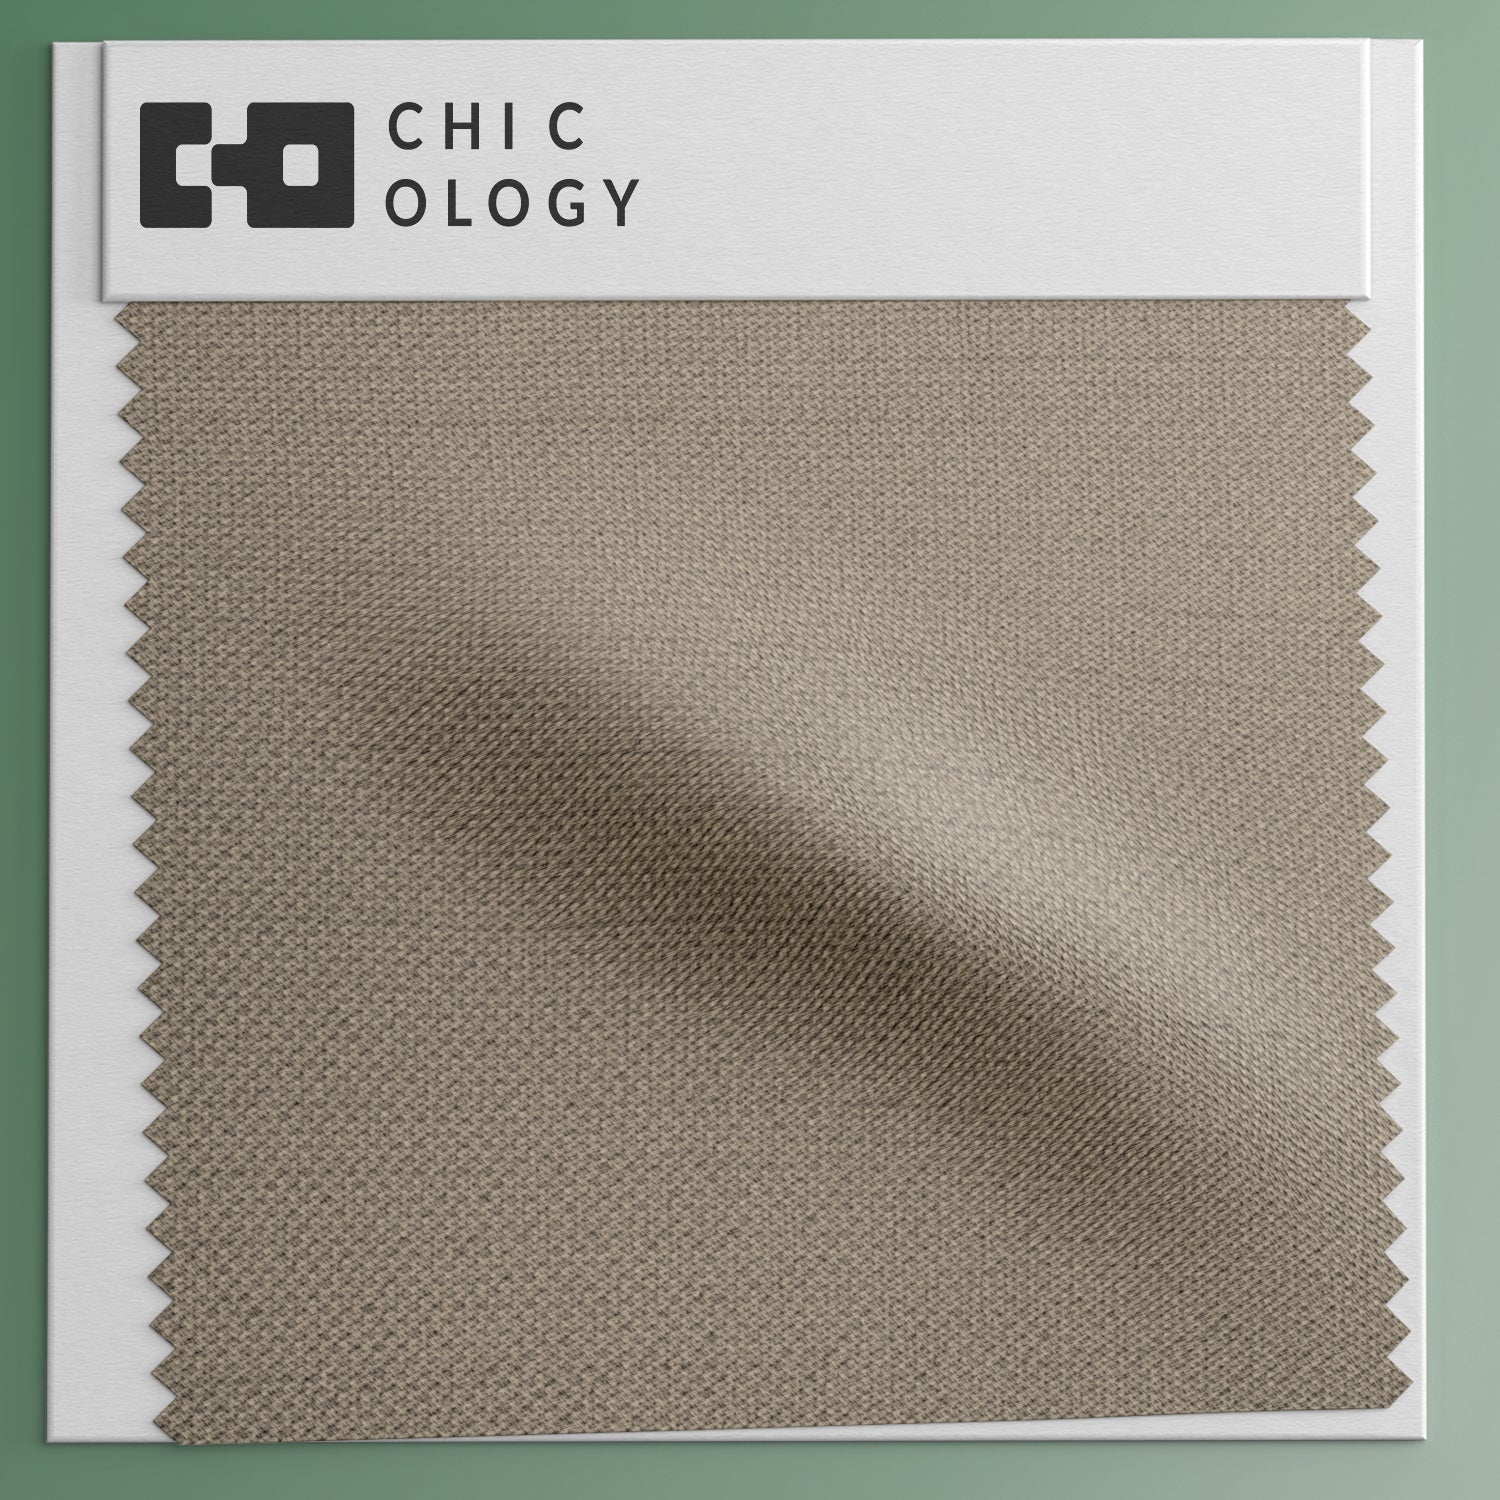 Light Filtering | Classical 7 Fold Front | Textured